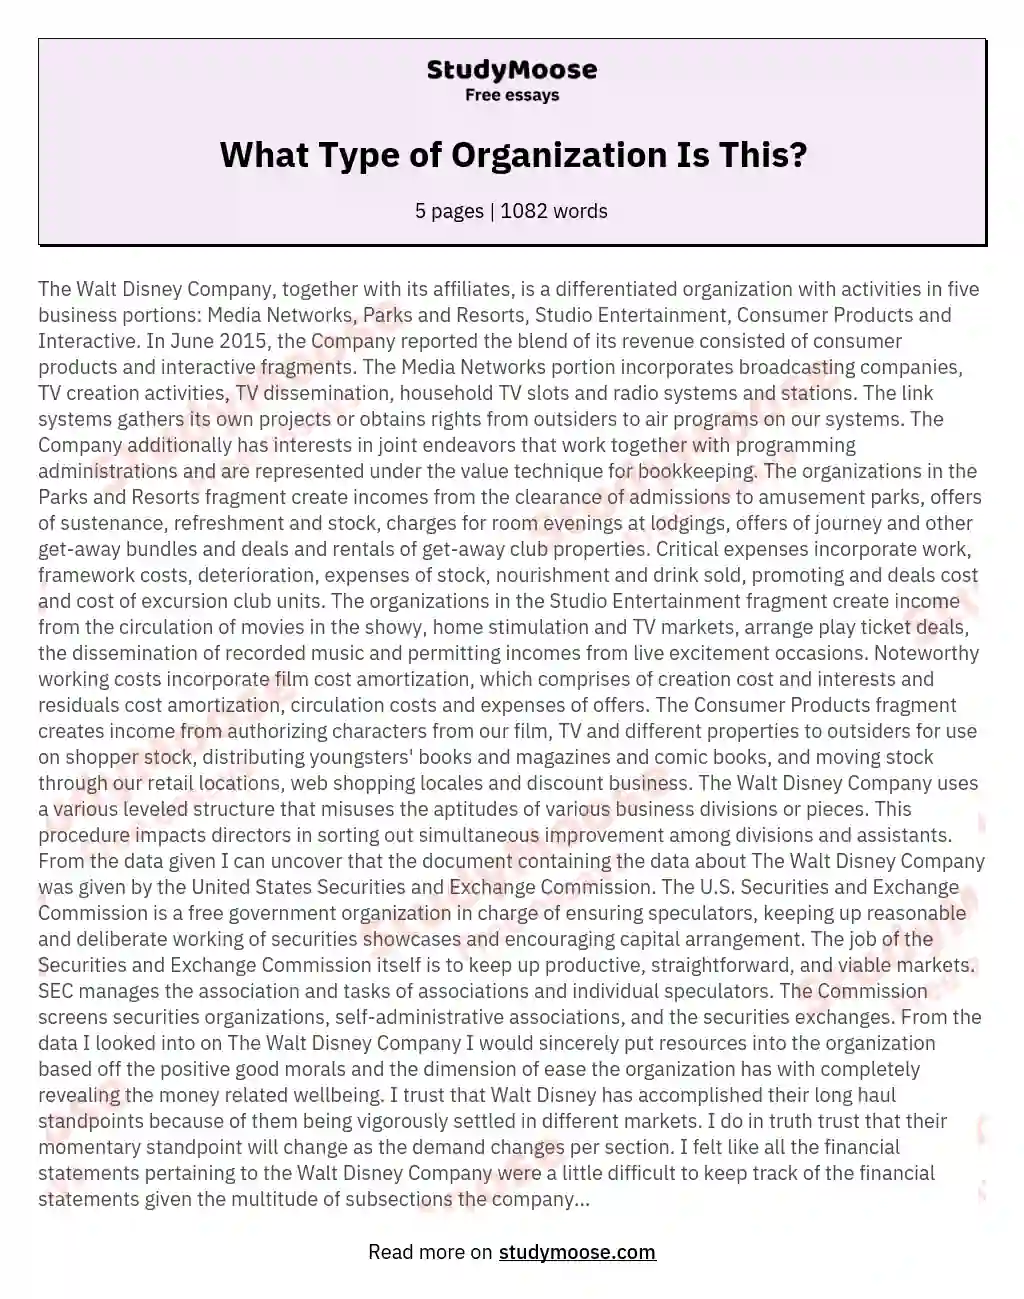 What Type of Organization Is This? essay